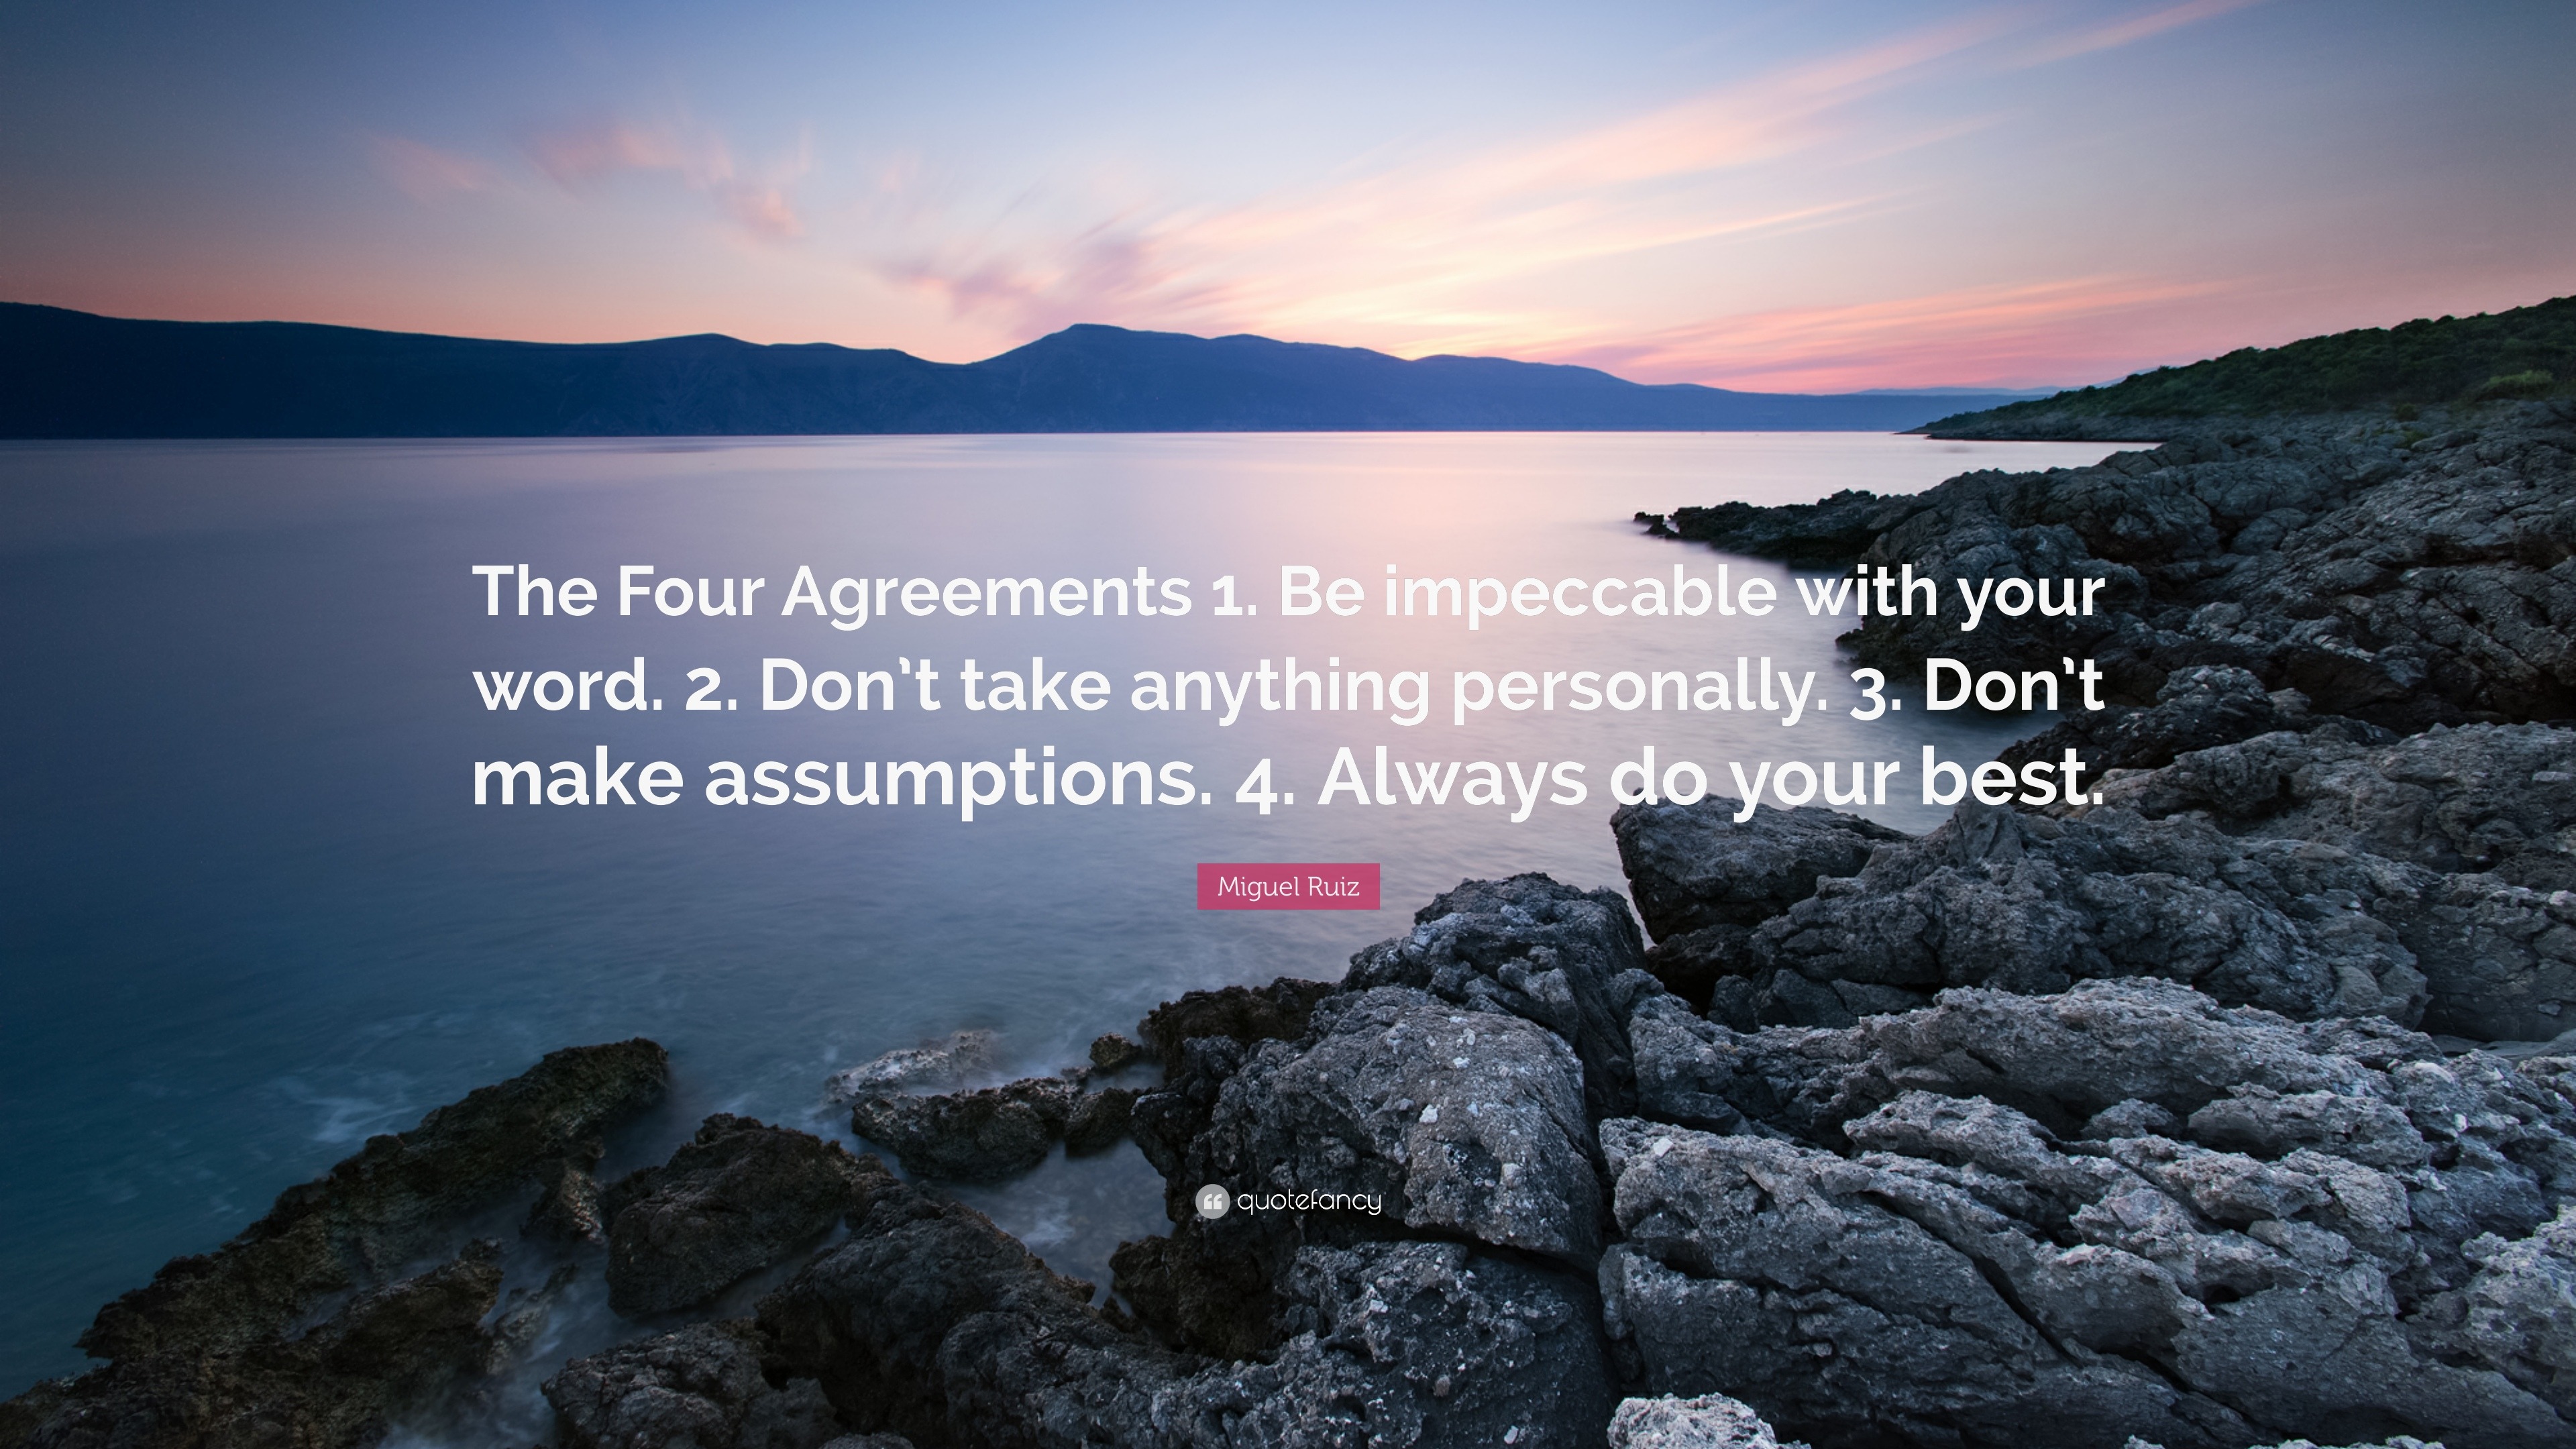 https://quotefancy.com/media/wallpaper/3840x2160/325186-Miguel-Ruiz-Quote-The-Four-Agreements-1-Be-impeccable-with-your.jpg